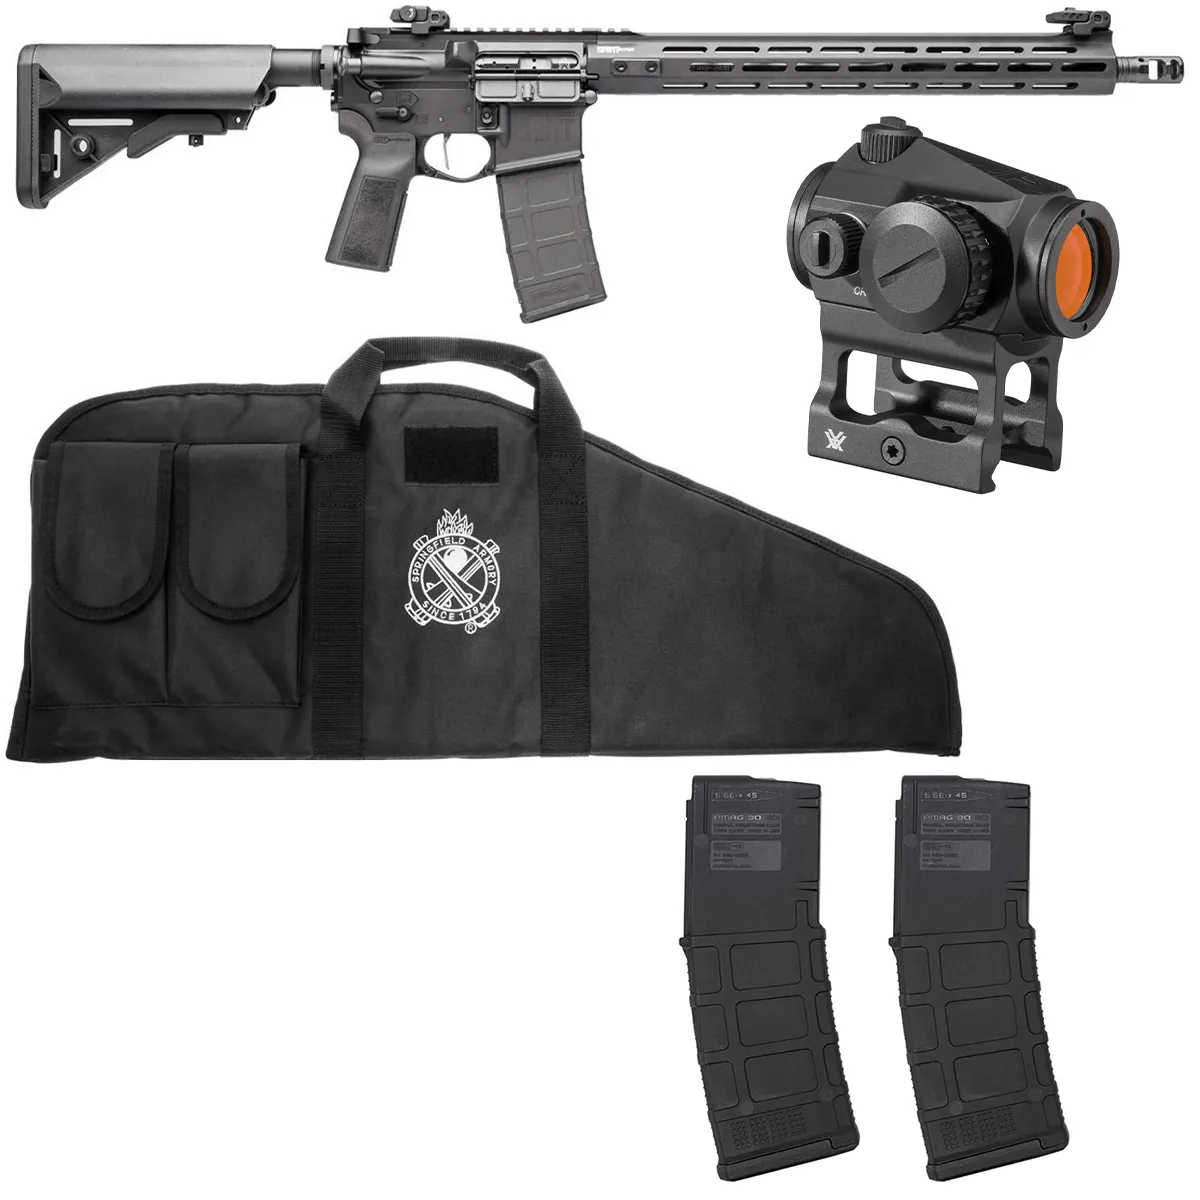 Springfield Armory SAINT Victor 223/5.56 AR-15 Rifle w/ Free! Red Dot and 2 Mags Gear Up Package